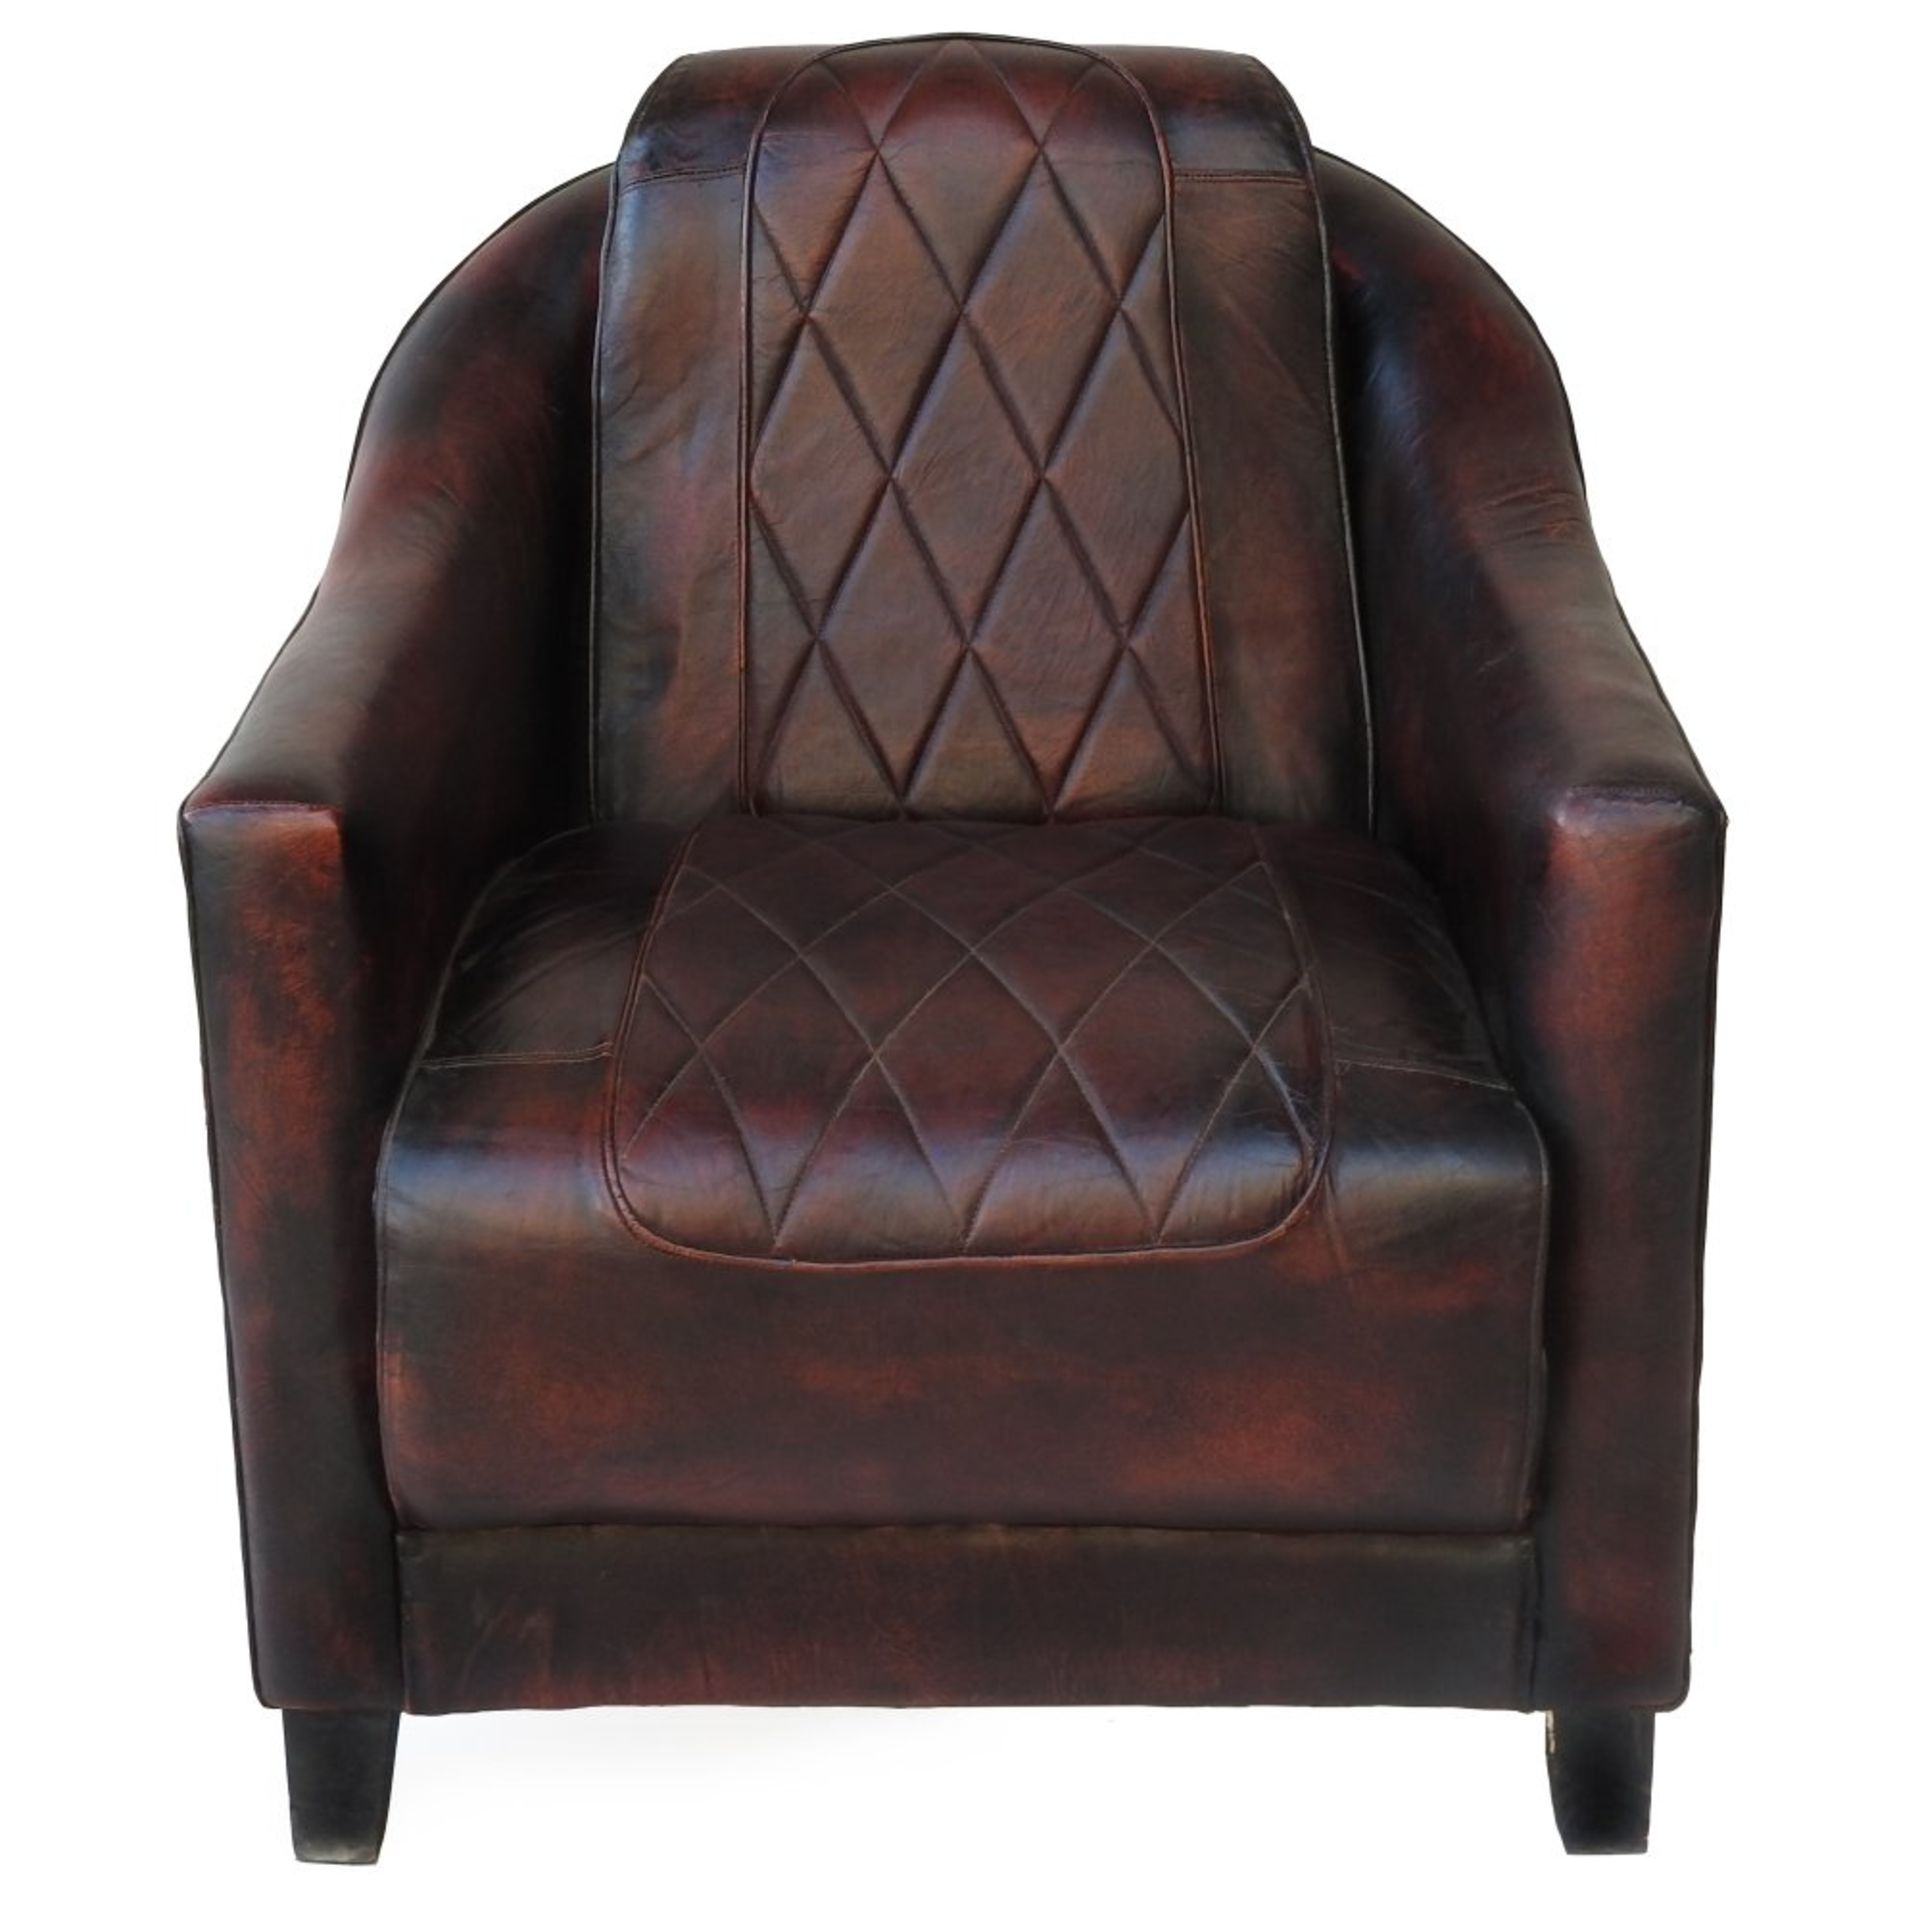 Union Jack Wingback Armchair - Image 3 of 7